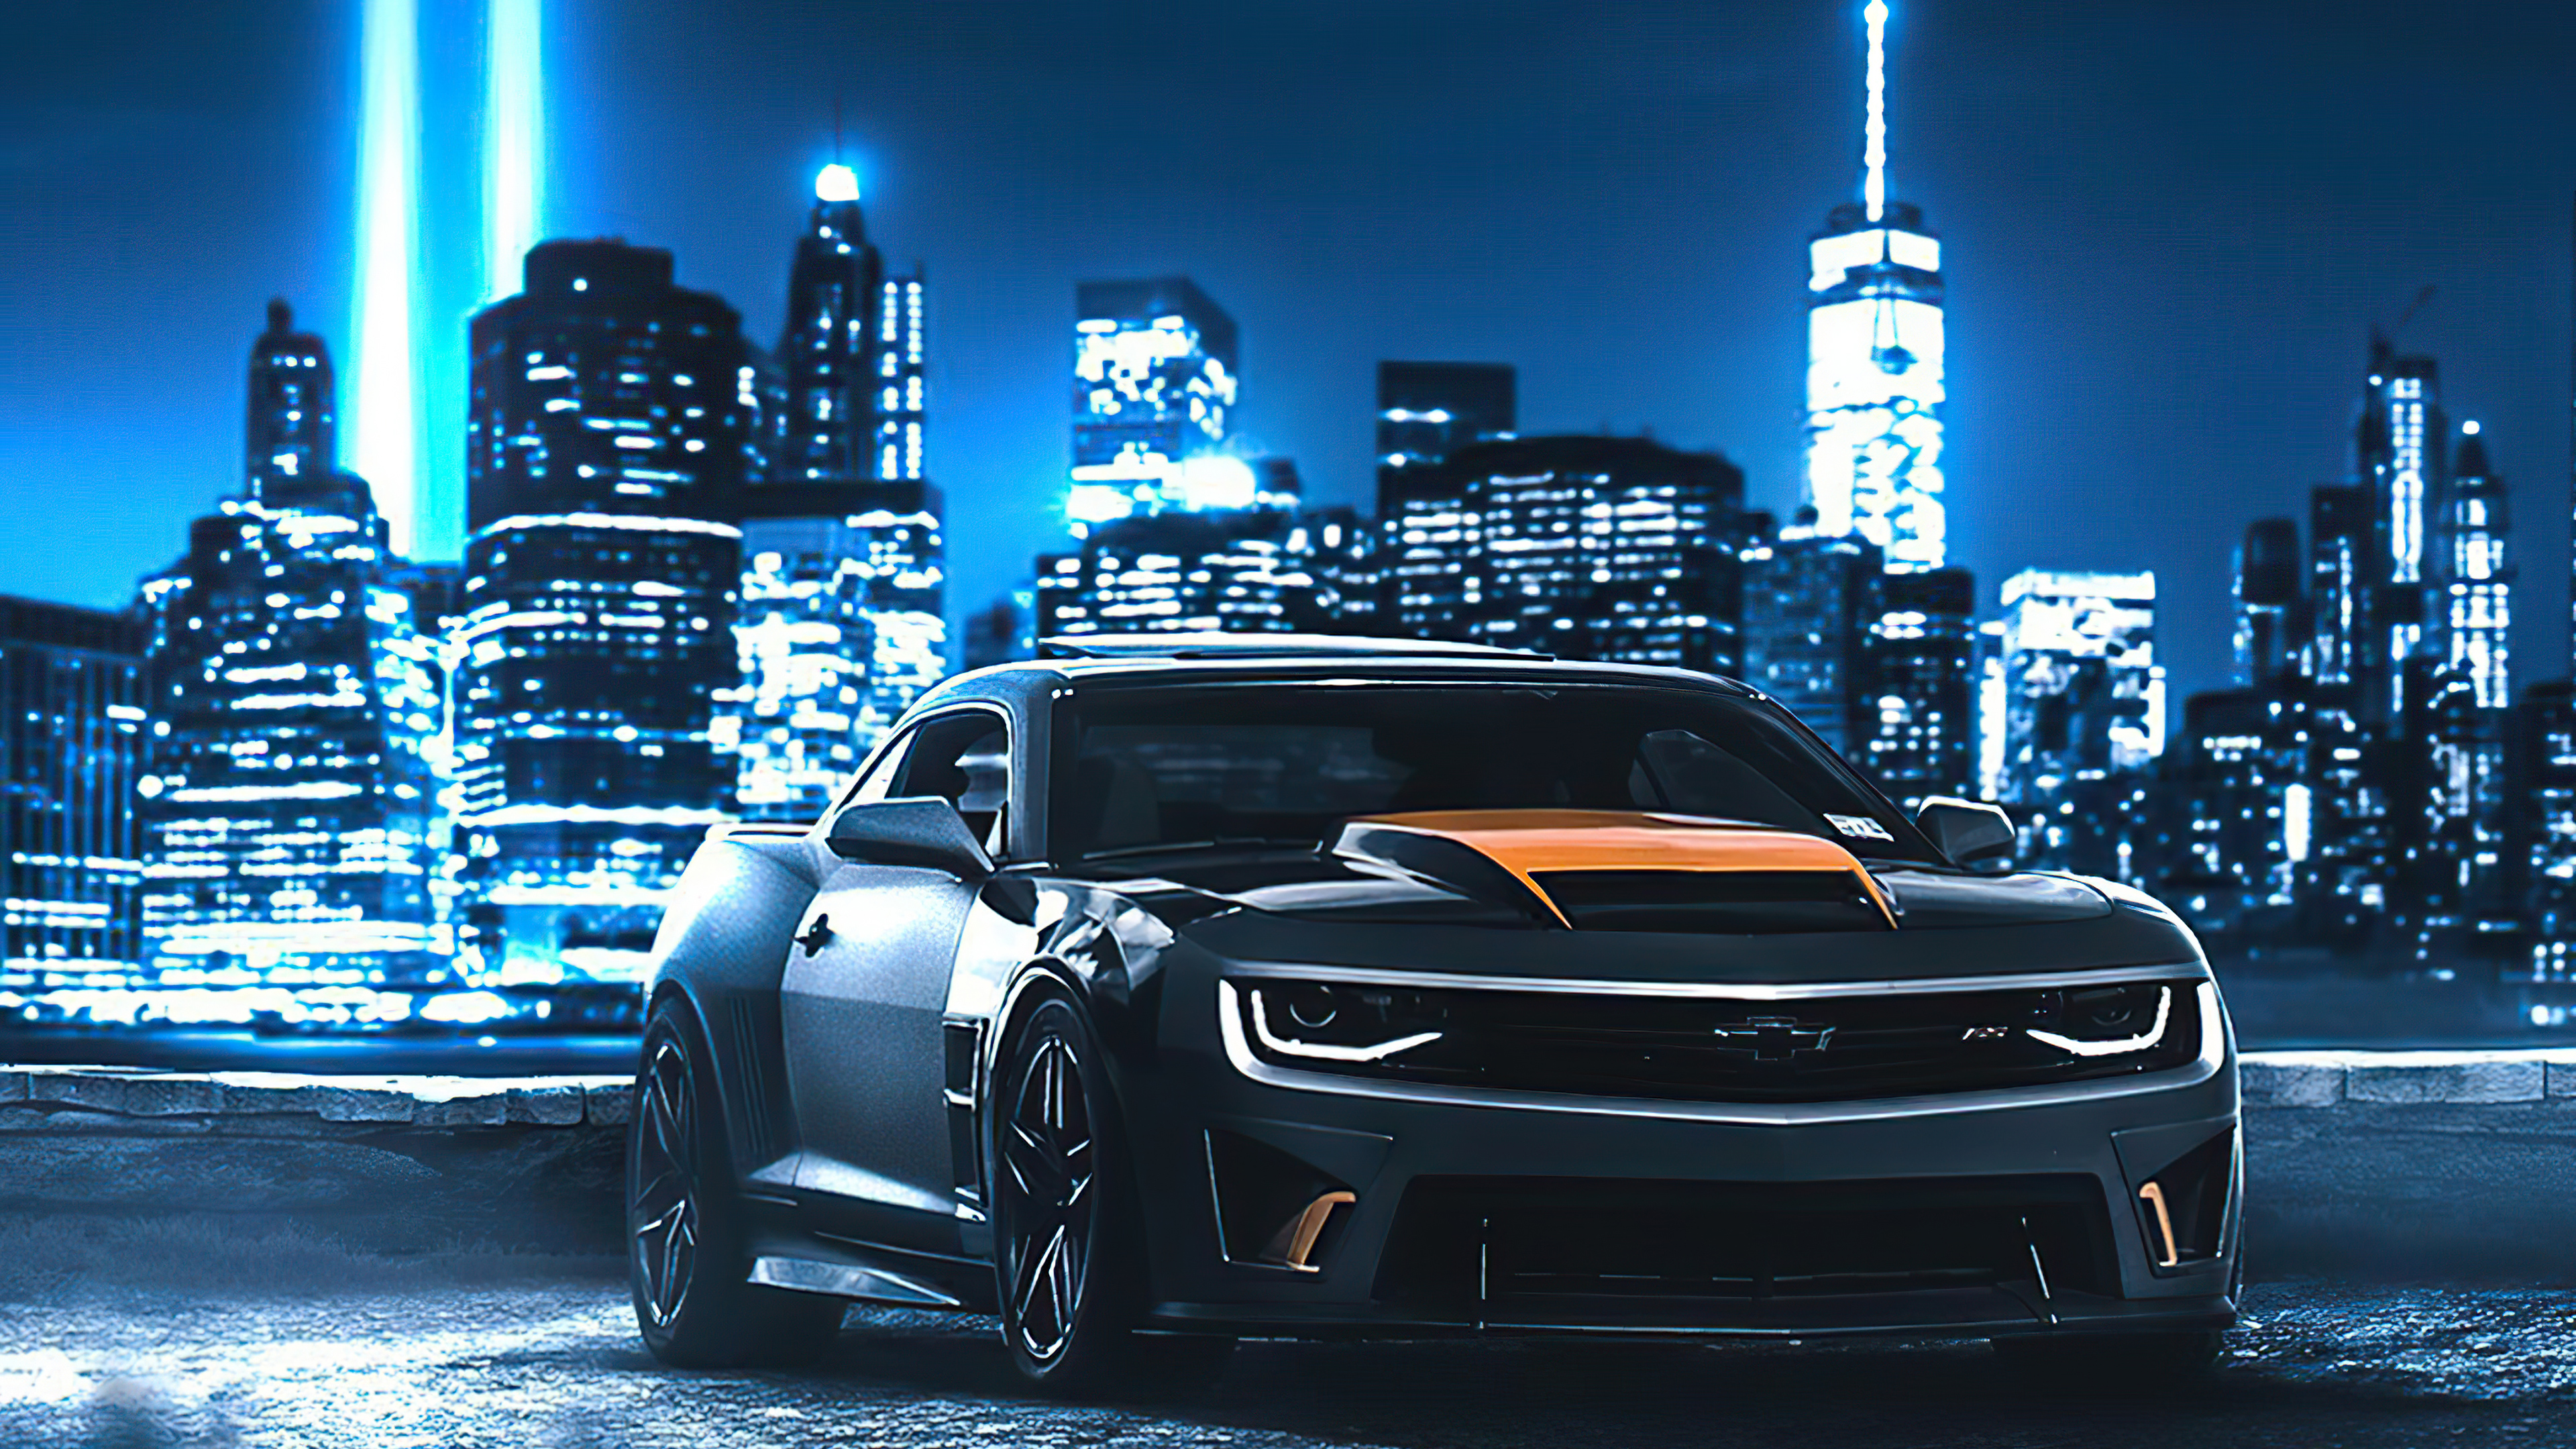 Camaro In Neon City 4k, HD Cars, 4k Wallpapers, Images, Backgrounds, Photos  and Pictures